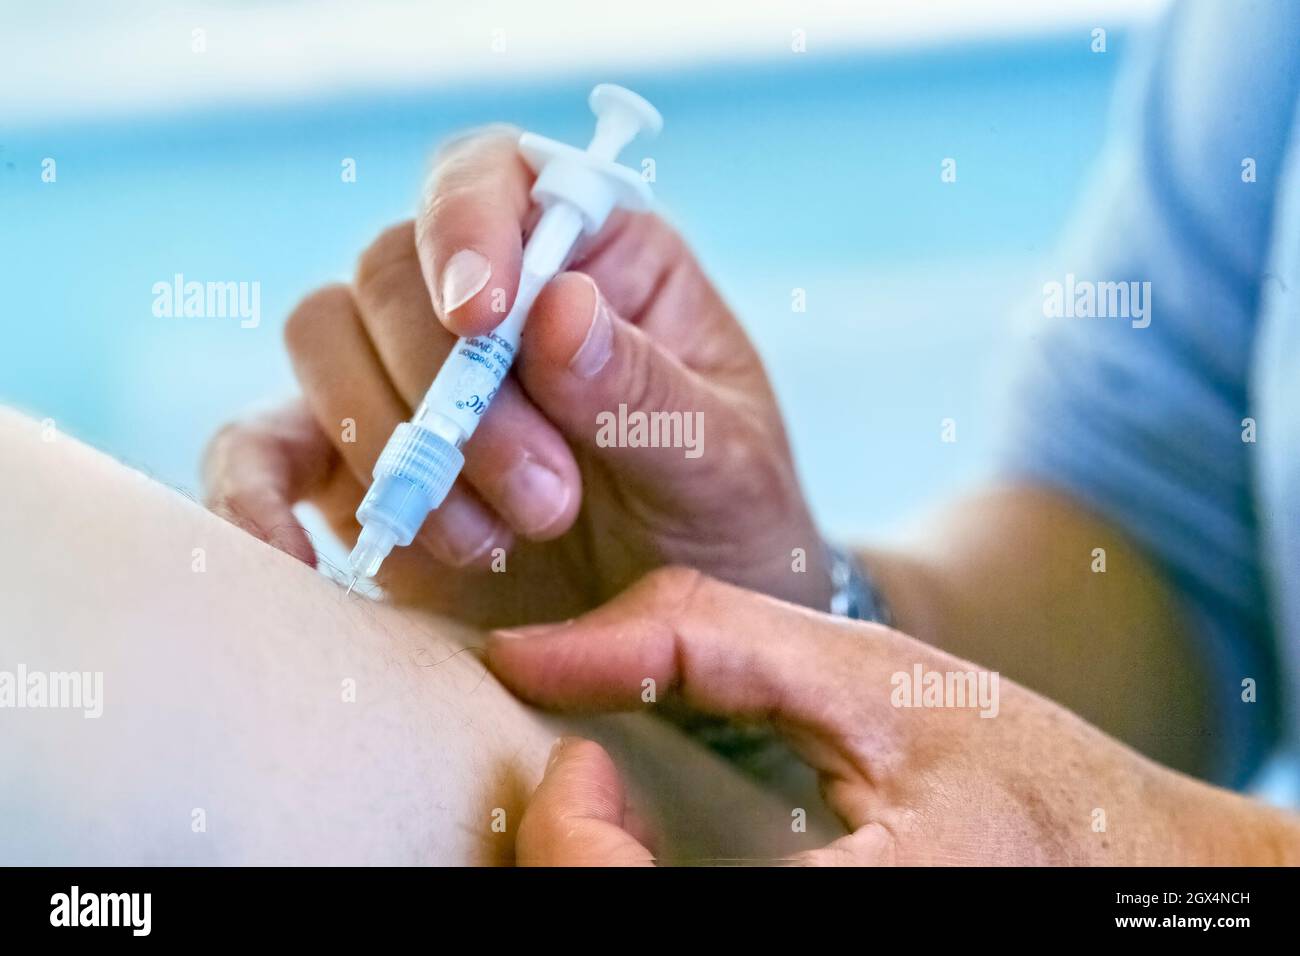 Influenza vaccination as an injection in the upper arm. Stock Photo